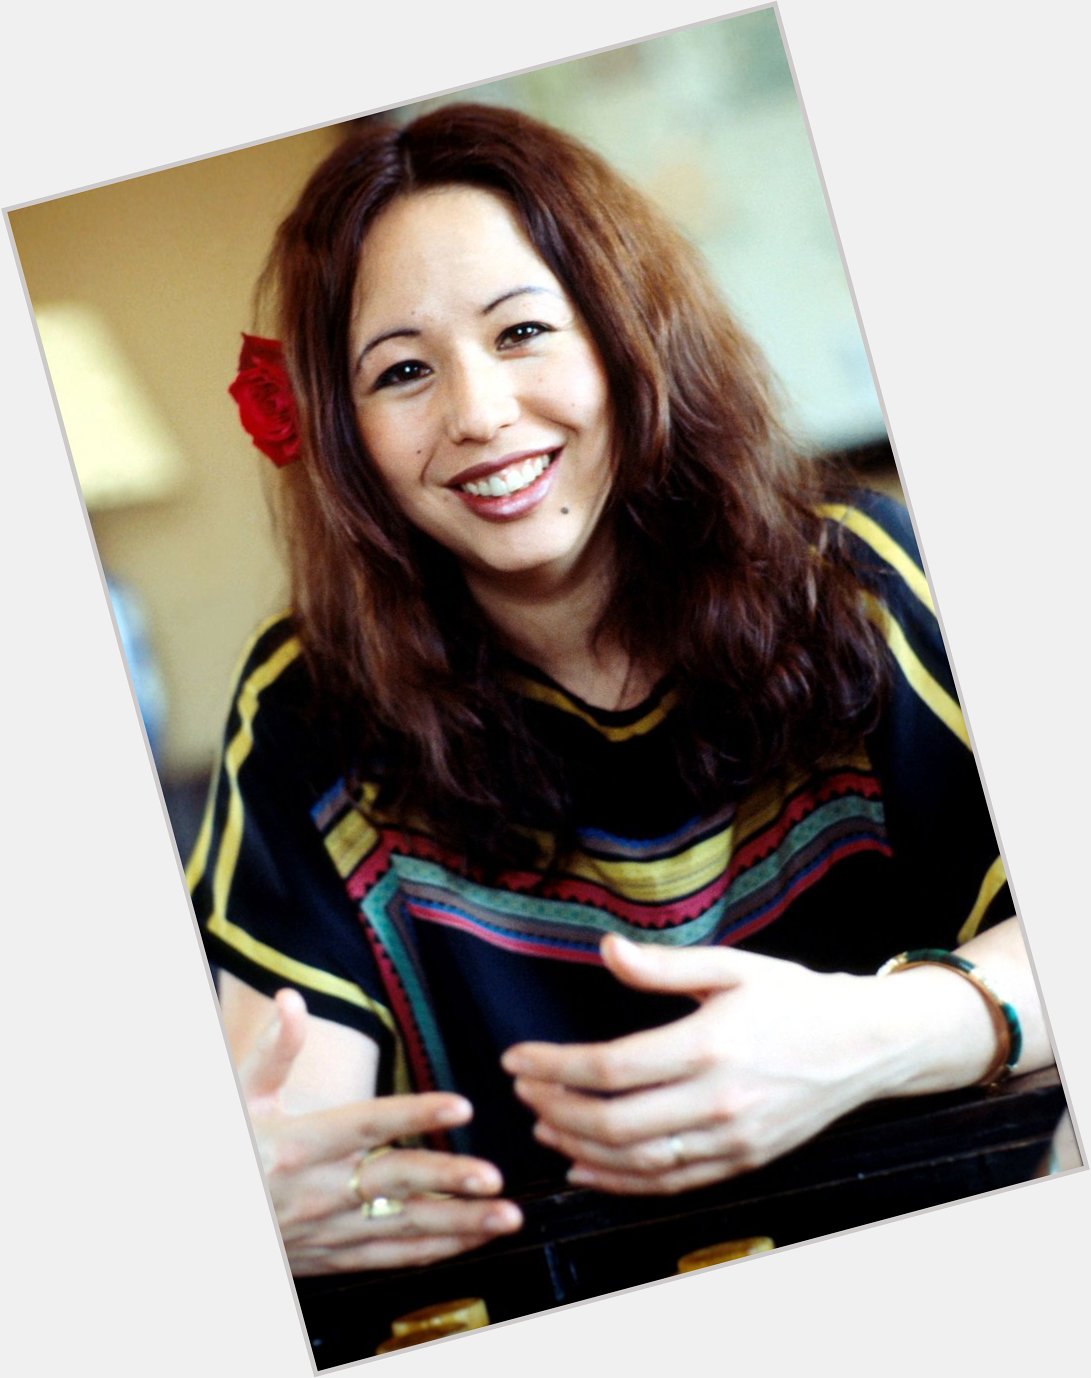 Please join us here at in wishing the one and only Yvonne Elliman a very Happy Birthday today  